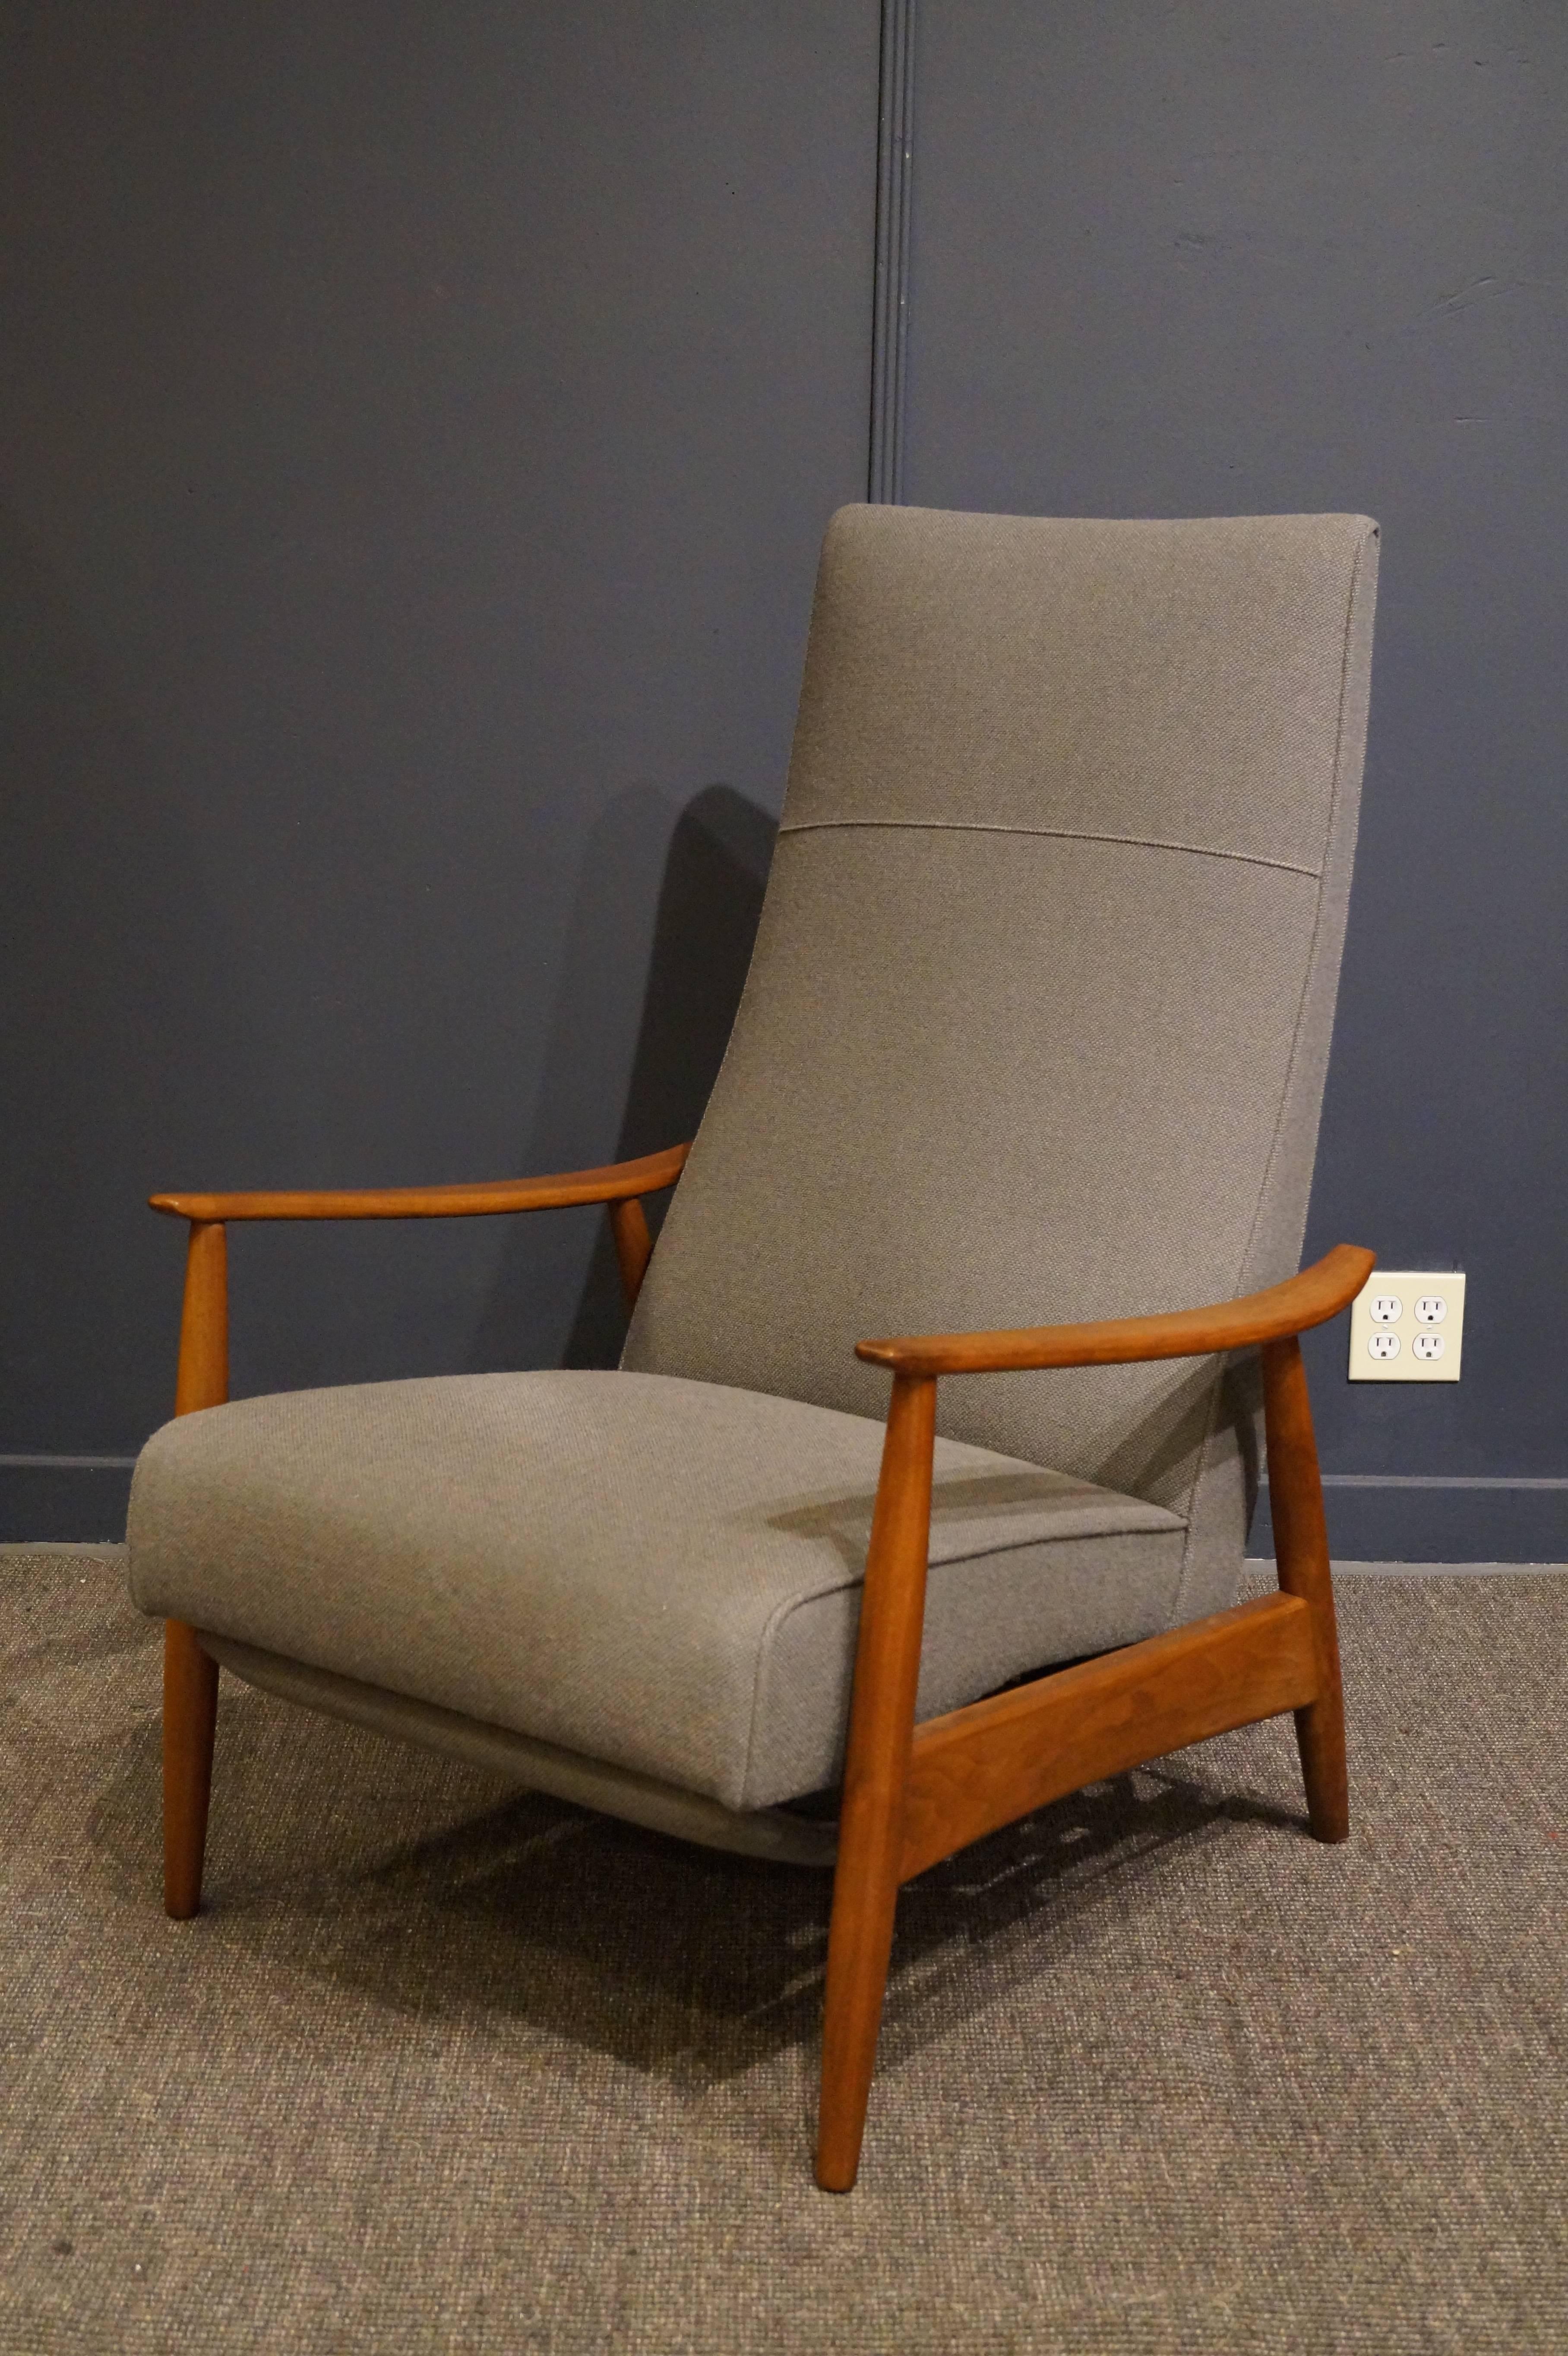 Milo Baughman design walnut high back lounge chair. Super comfy recliner with generous proportions, two different positions and an extending footrest. 
Perfectly refinished and newly upholstered in Maharam wool.